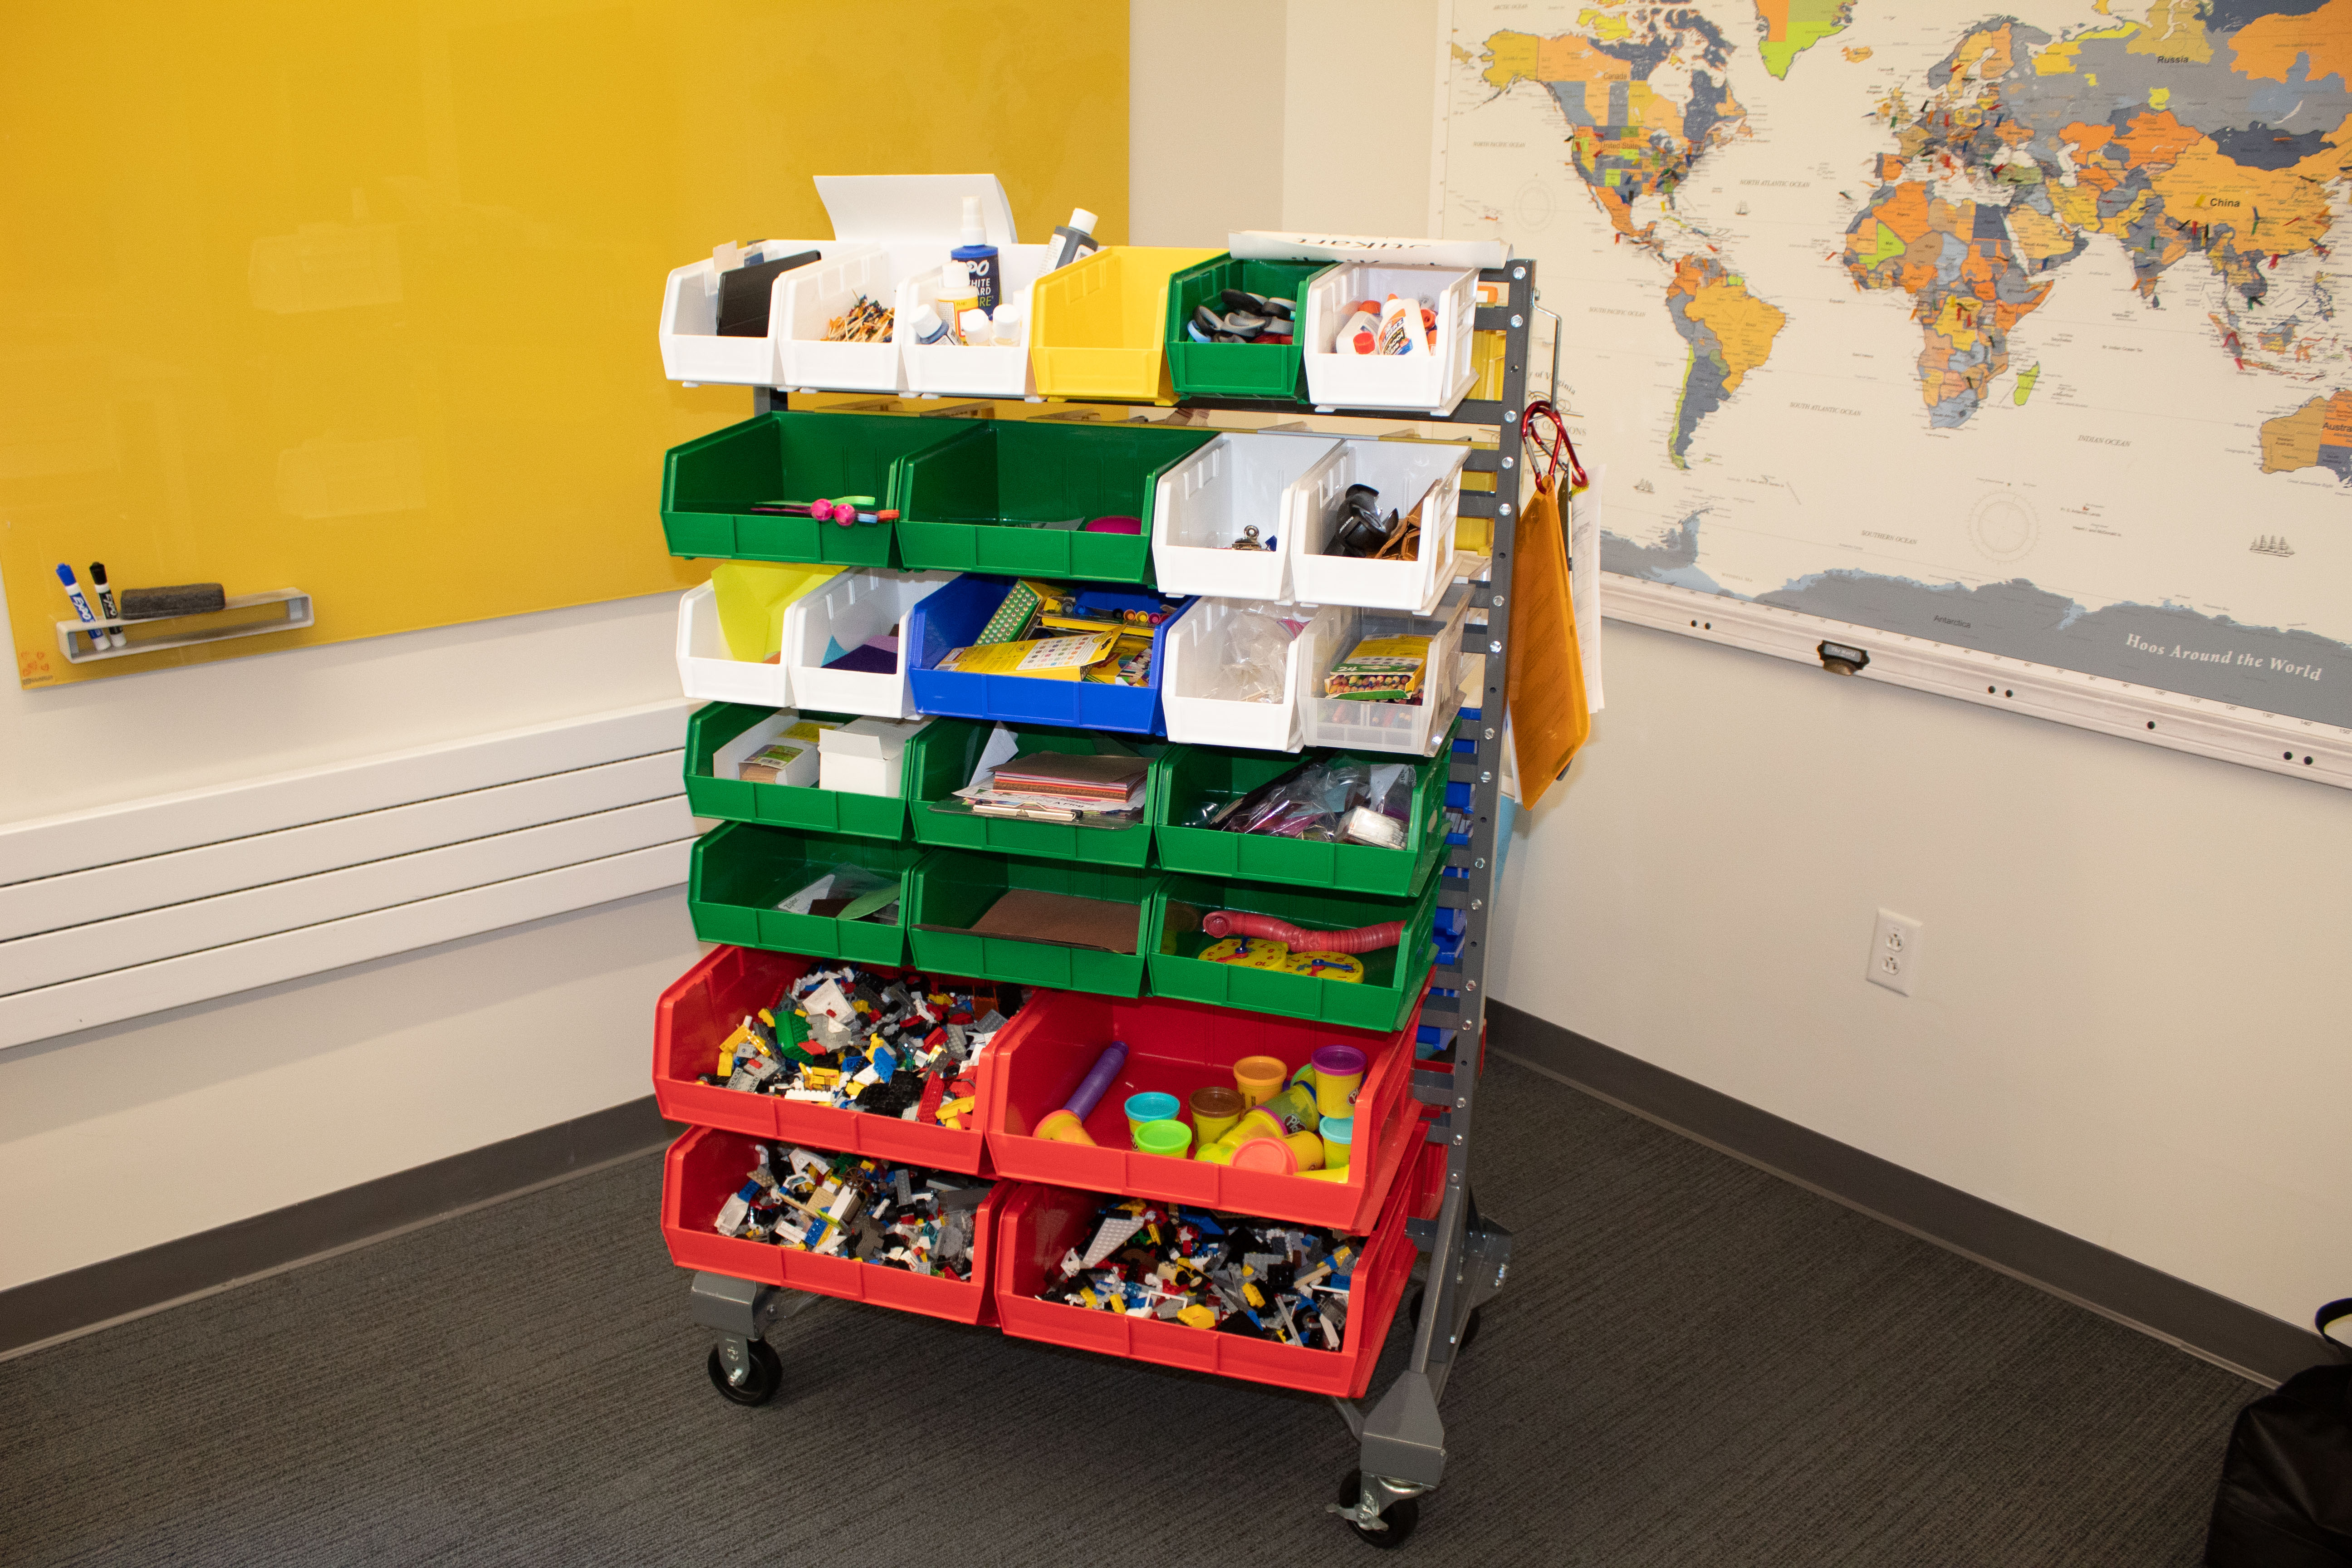 a cart of physical materials for learning